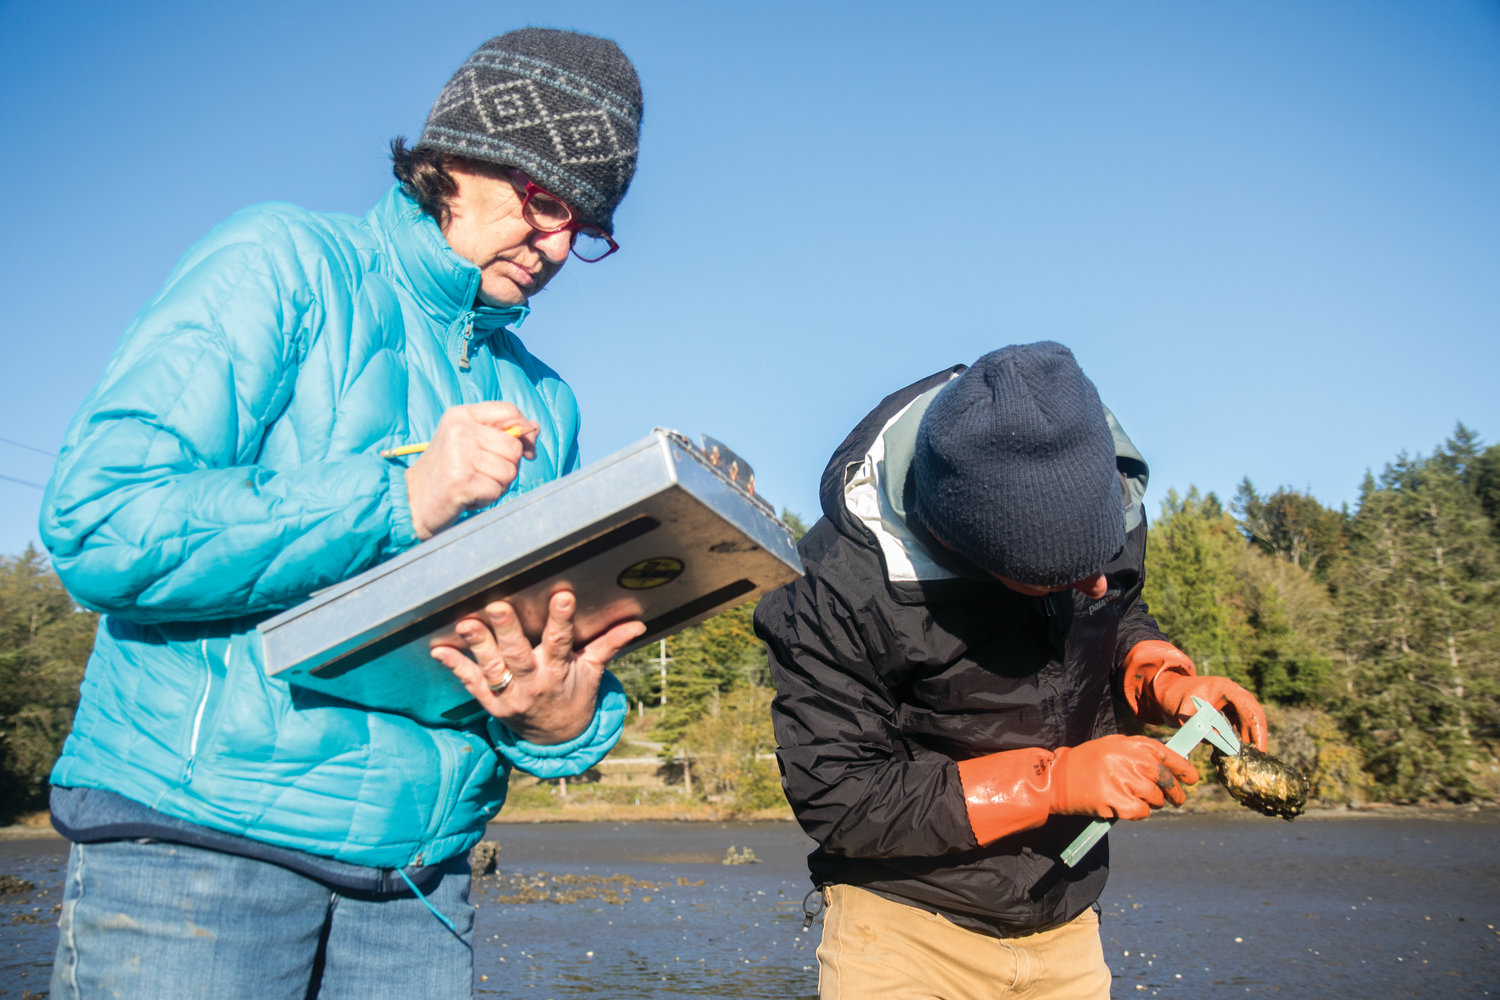 Marine Resource Committee member Sarah Fisken takes down the data as Neil Harrington measures Olympia oyster spat growing on Pacific oyster shells that MRC volunteers spread throughout Discovery Bay in the hopes of providing more surfaces for the oysters to grow on.